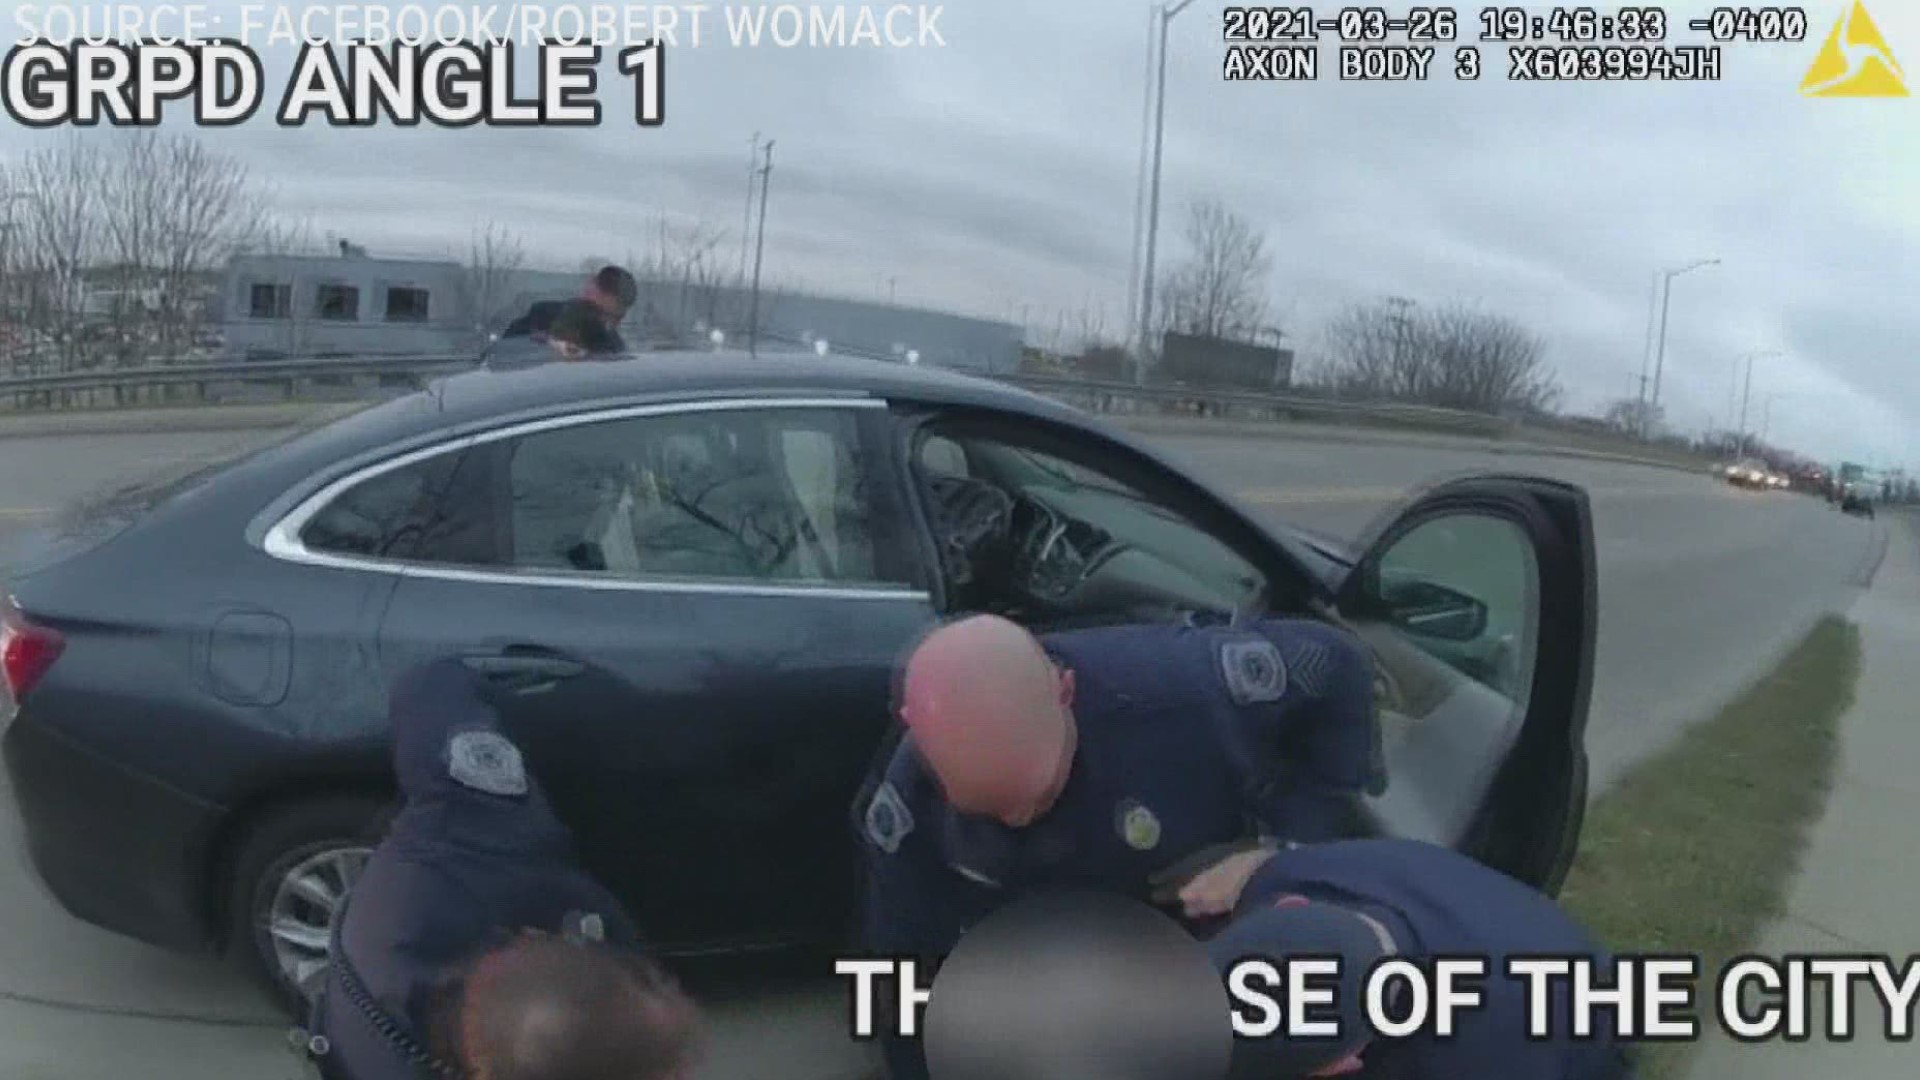 In the body cam video from March 26, police pull over three men in a car at South Division and Hall Street.